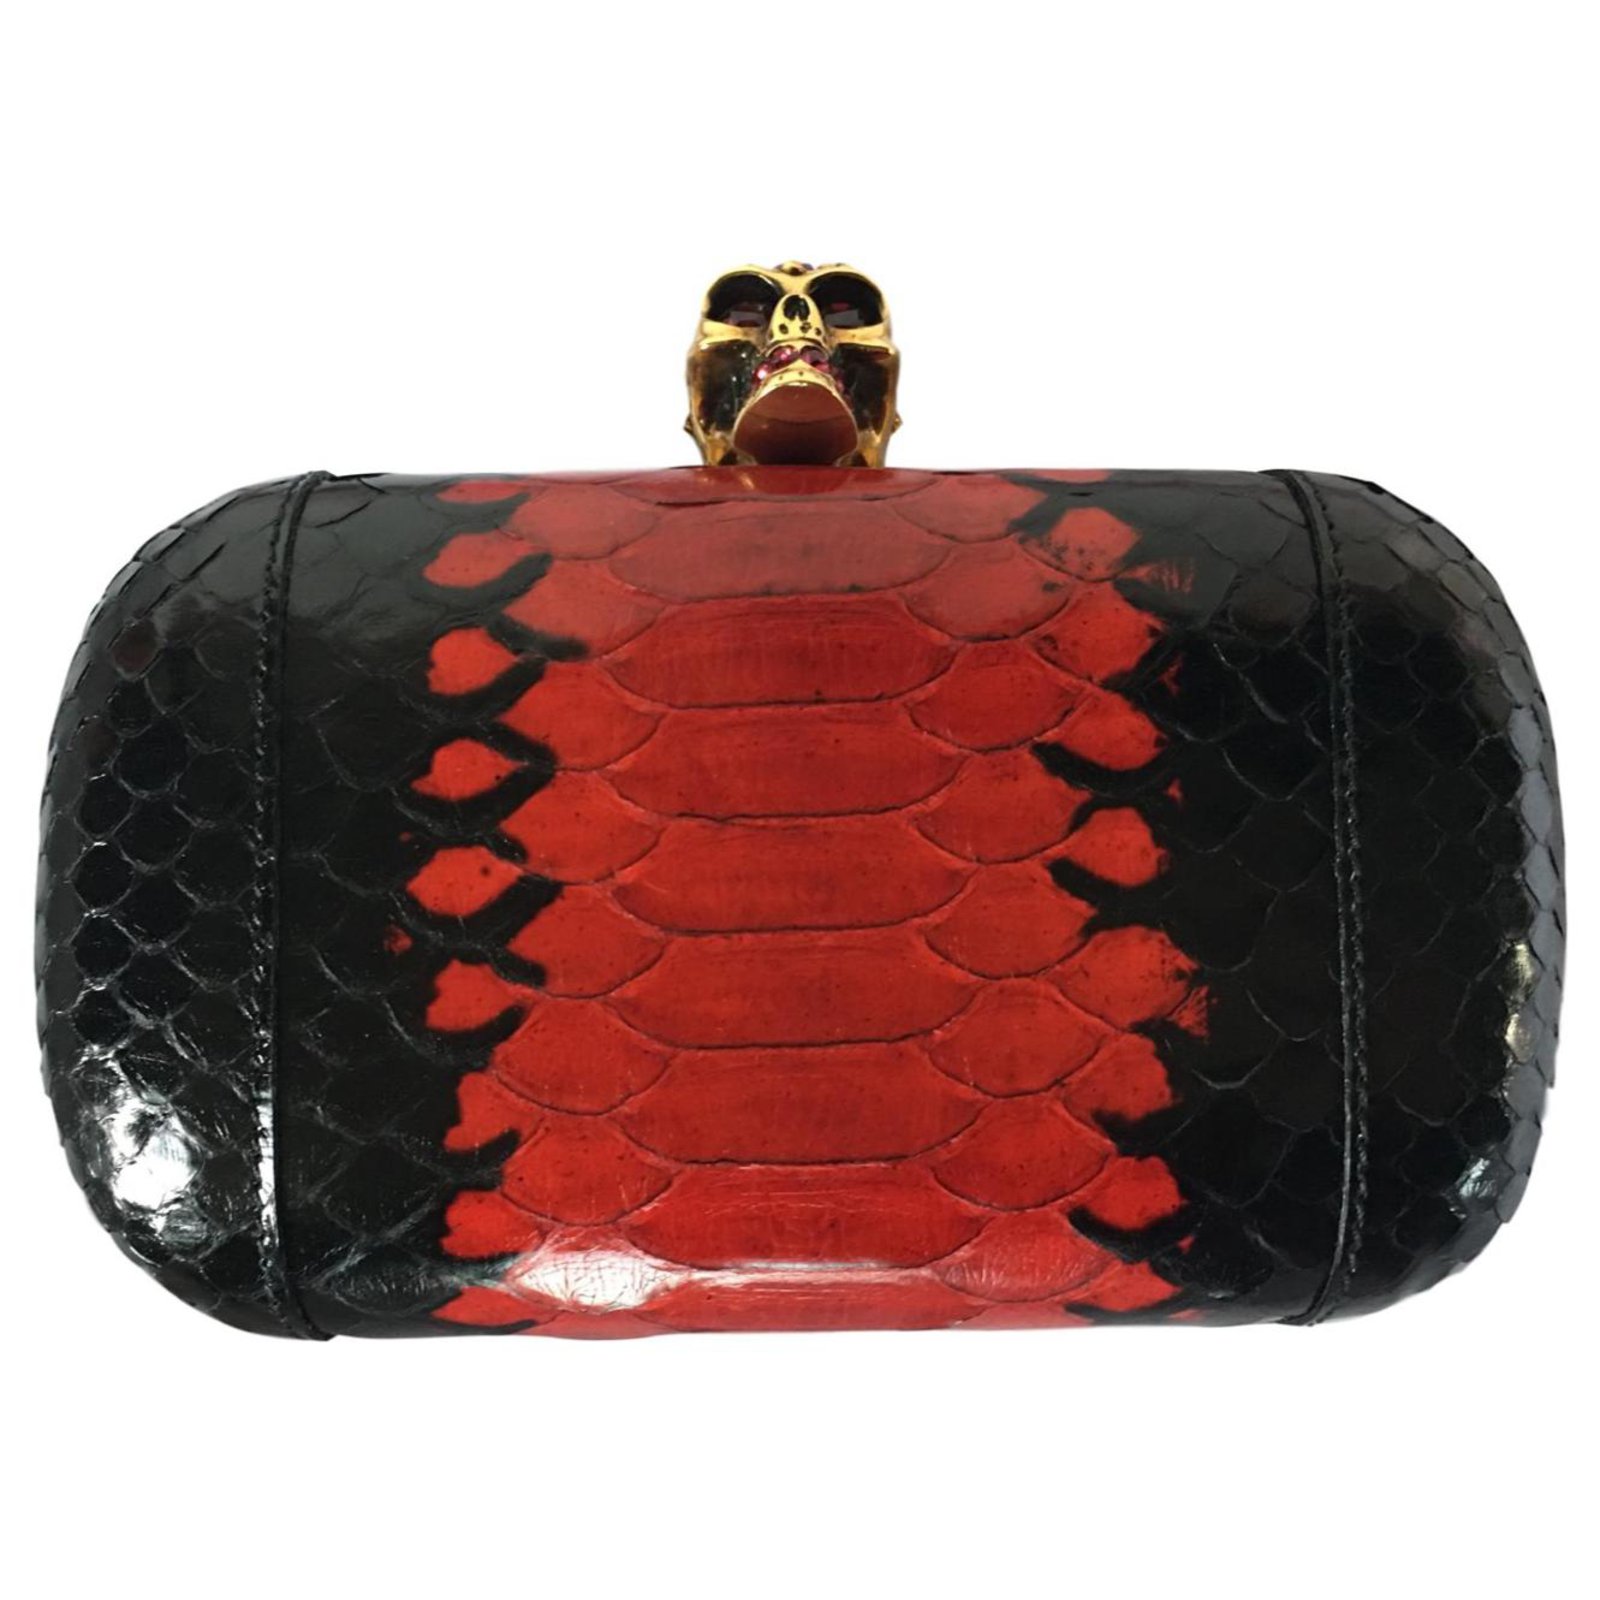 black and red clutch bag